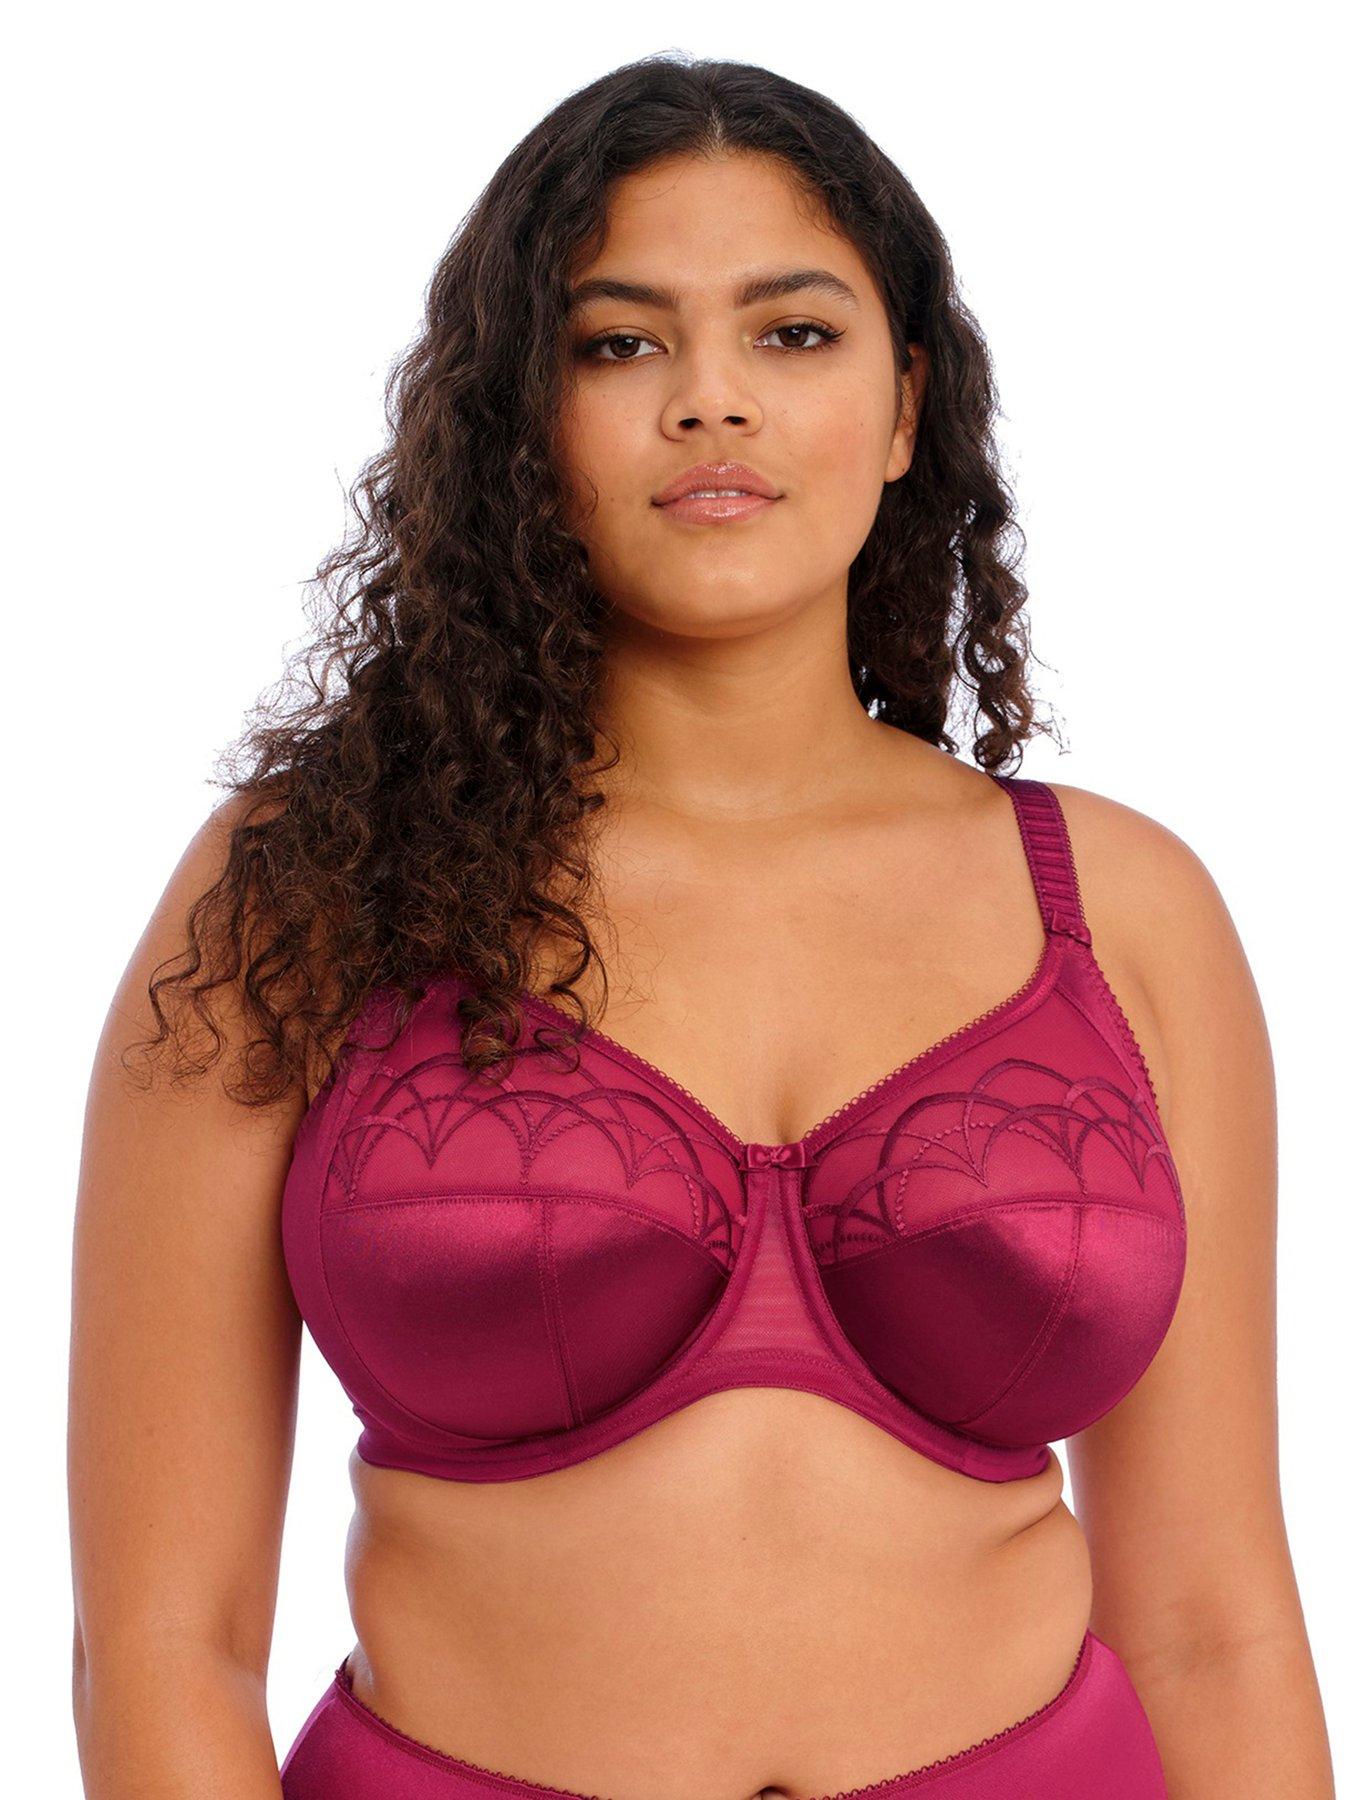 Miss Mary of Sweden Rose Underwired Bra - Red